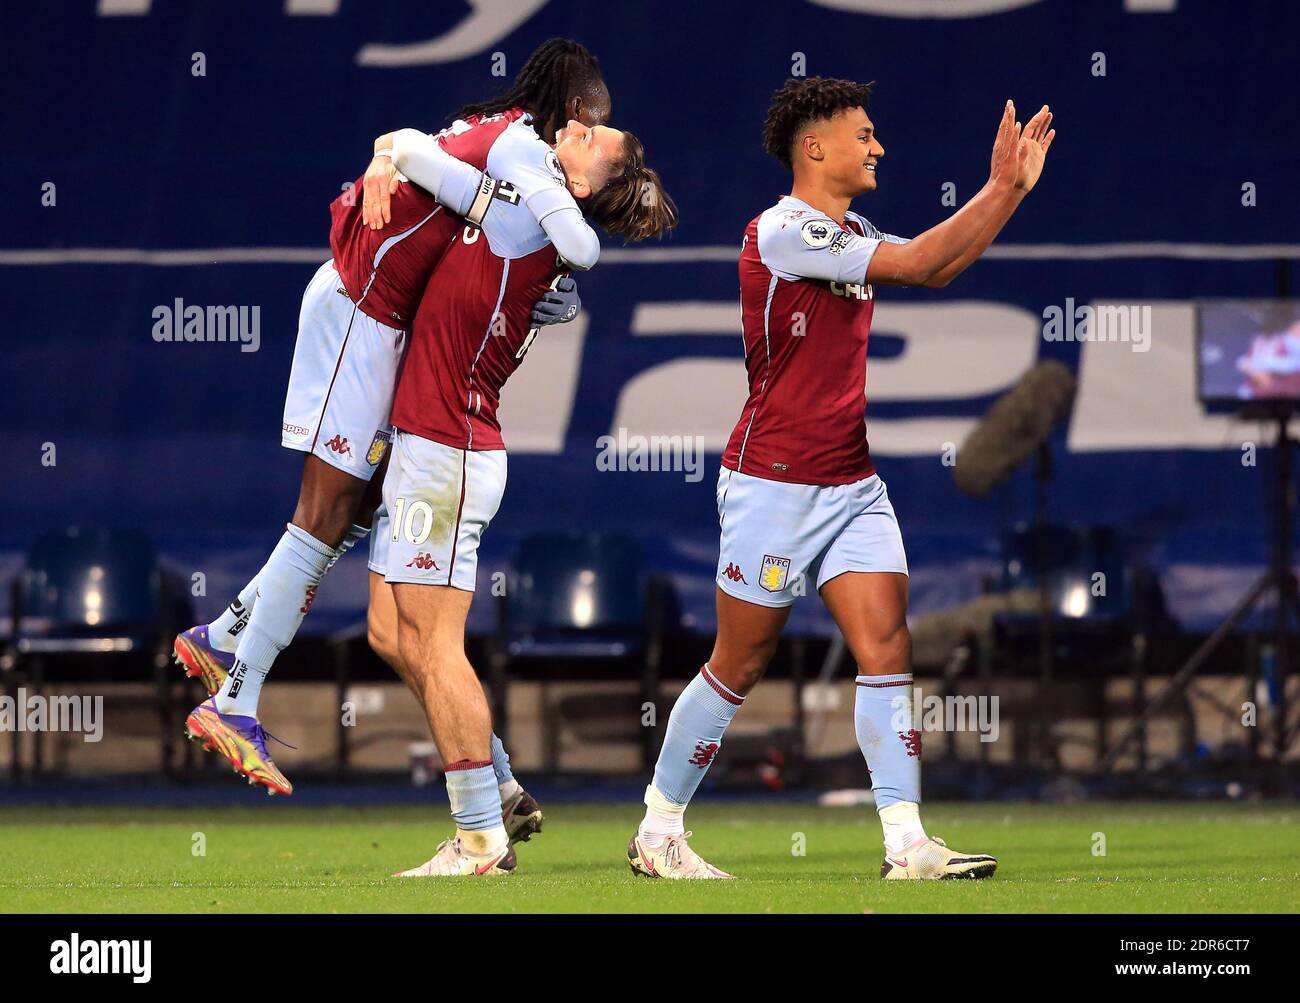 Aston Villas Bertrand Traore celebrates scoring his sides second goal of the game with Jack Grealish during the Premier League match at The Hawthorns, West Bromwich Stock Photo